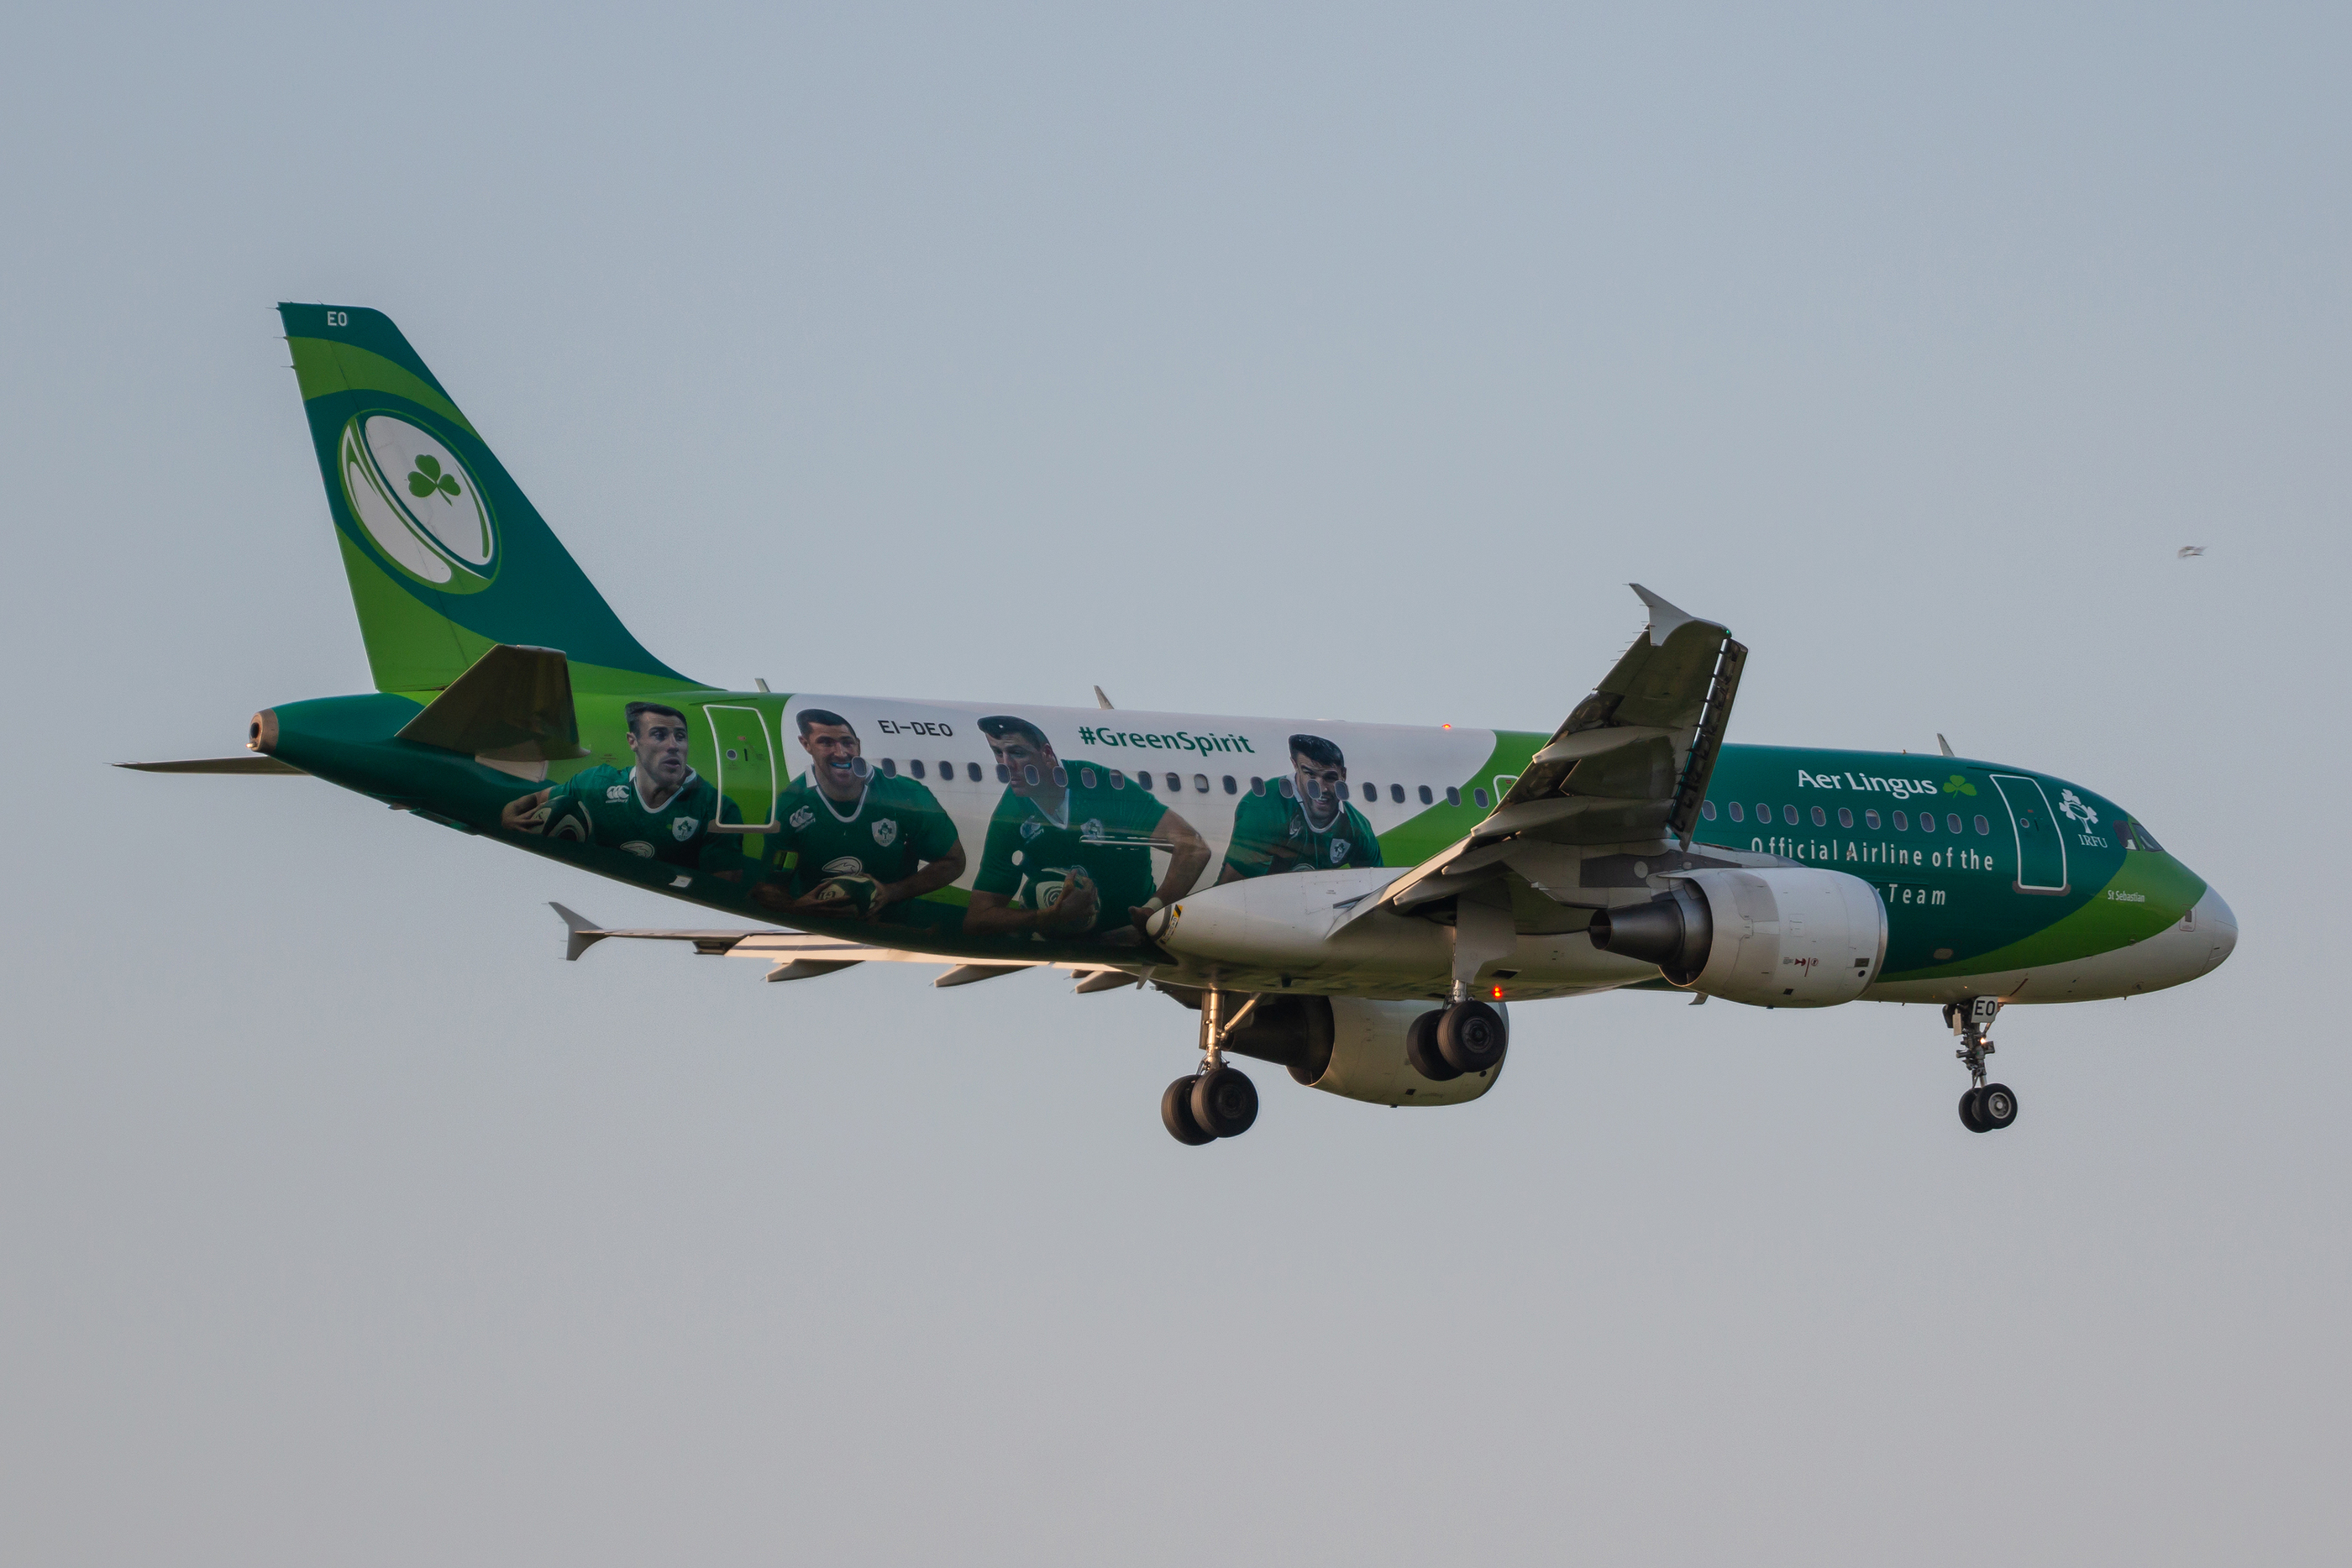 a plane with images on the side and the tail